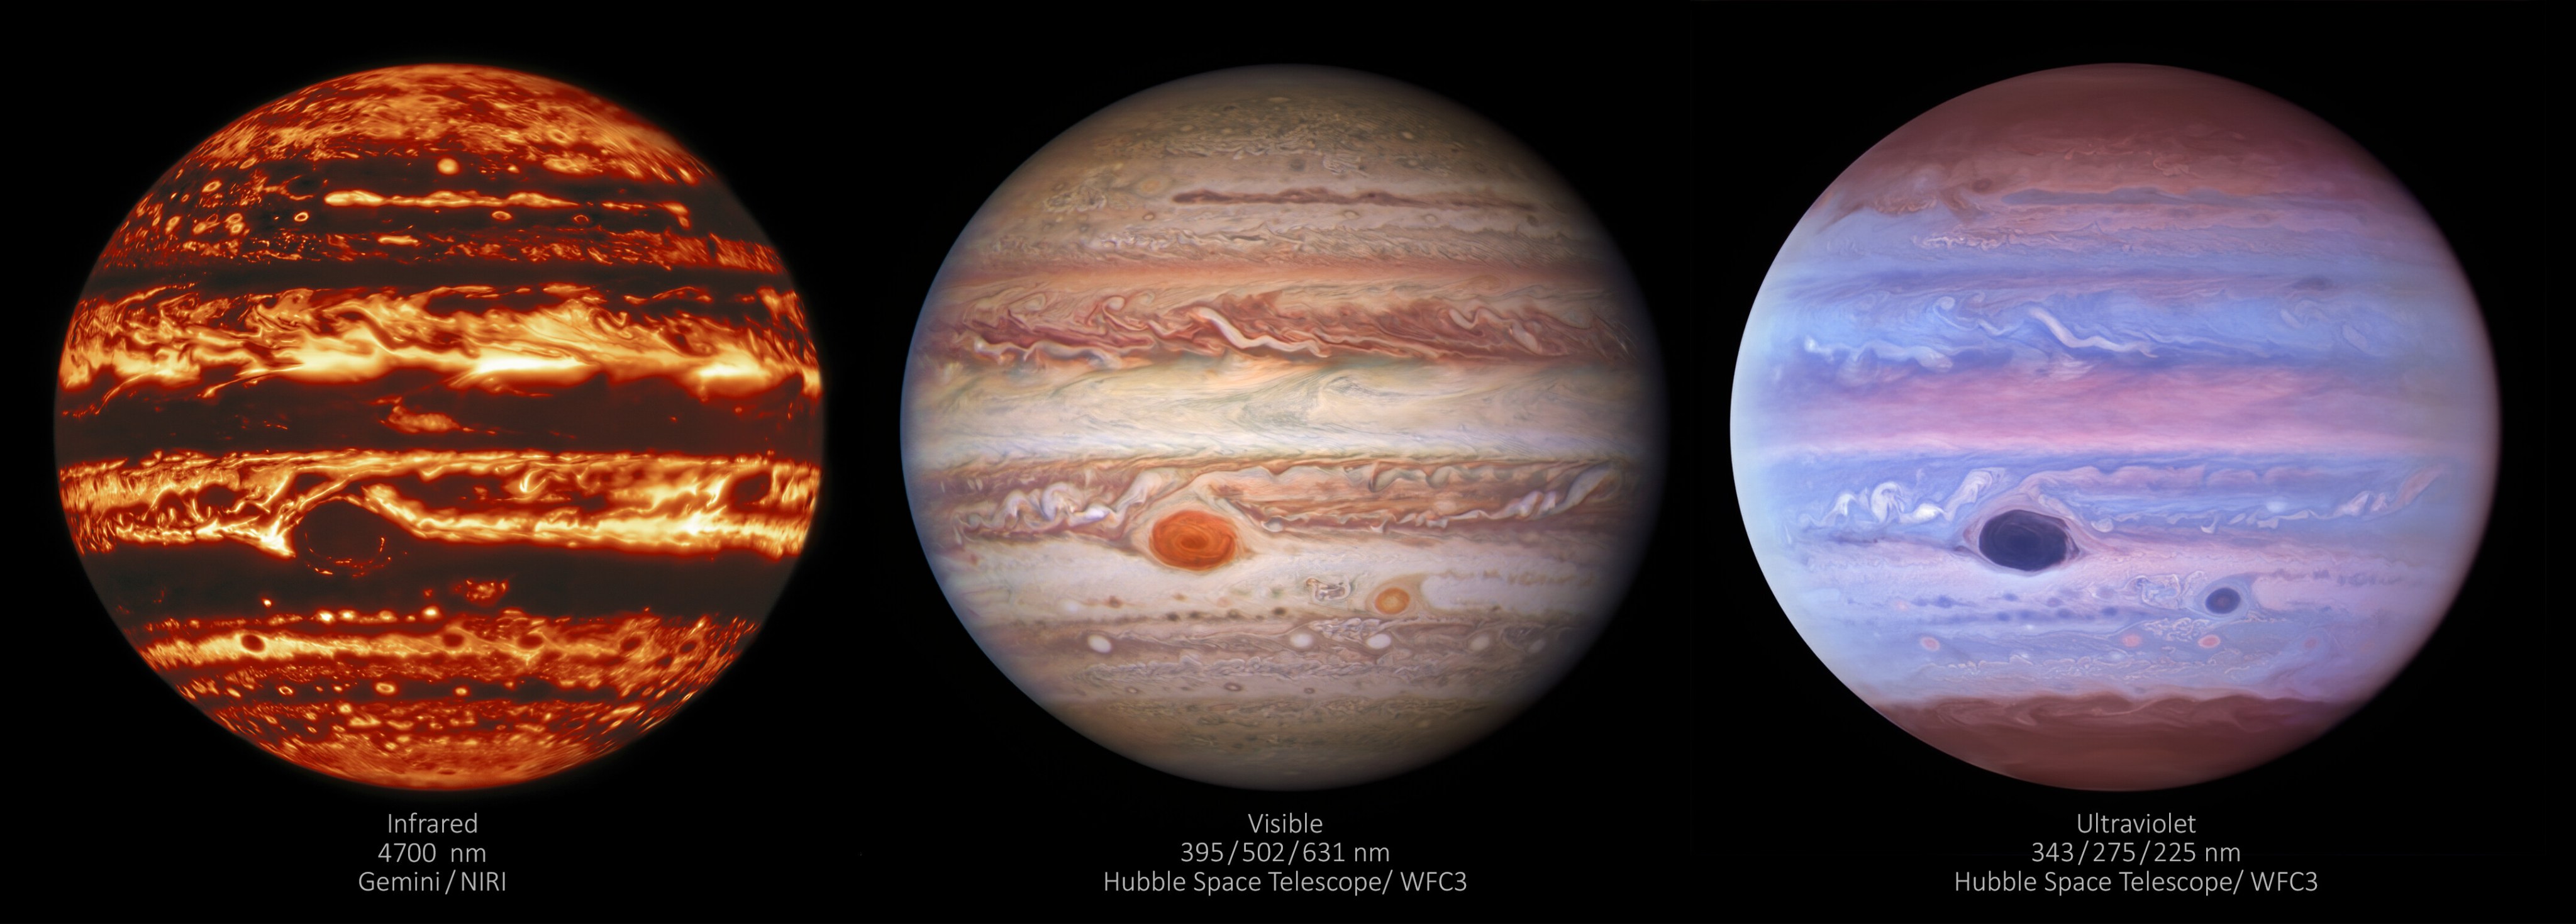 Three images of Jupiter, from left to right: Infrared Jupiter holds bright yellow, deep red, orange and marron stripes. The Great Red Spot is a deep maroon. The middle image is in the visible light our eyes are sensitive to. It reveals horizontal stripes in muted tones of red and orange along with wide white bands. The Great Red Spot is deep orange with bands of dark red. The final image is in ultraviolet. Here Jupiter's cloud bands are in tones of blue, pink and purple. The Great Red Spot appears as a dark blue.